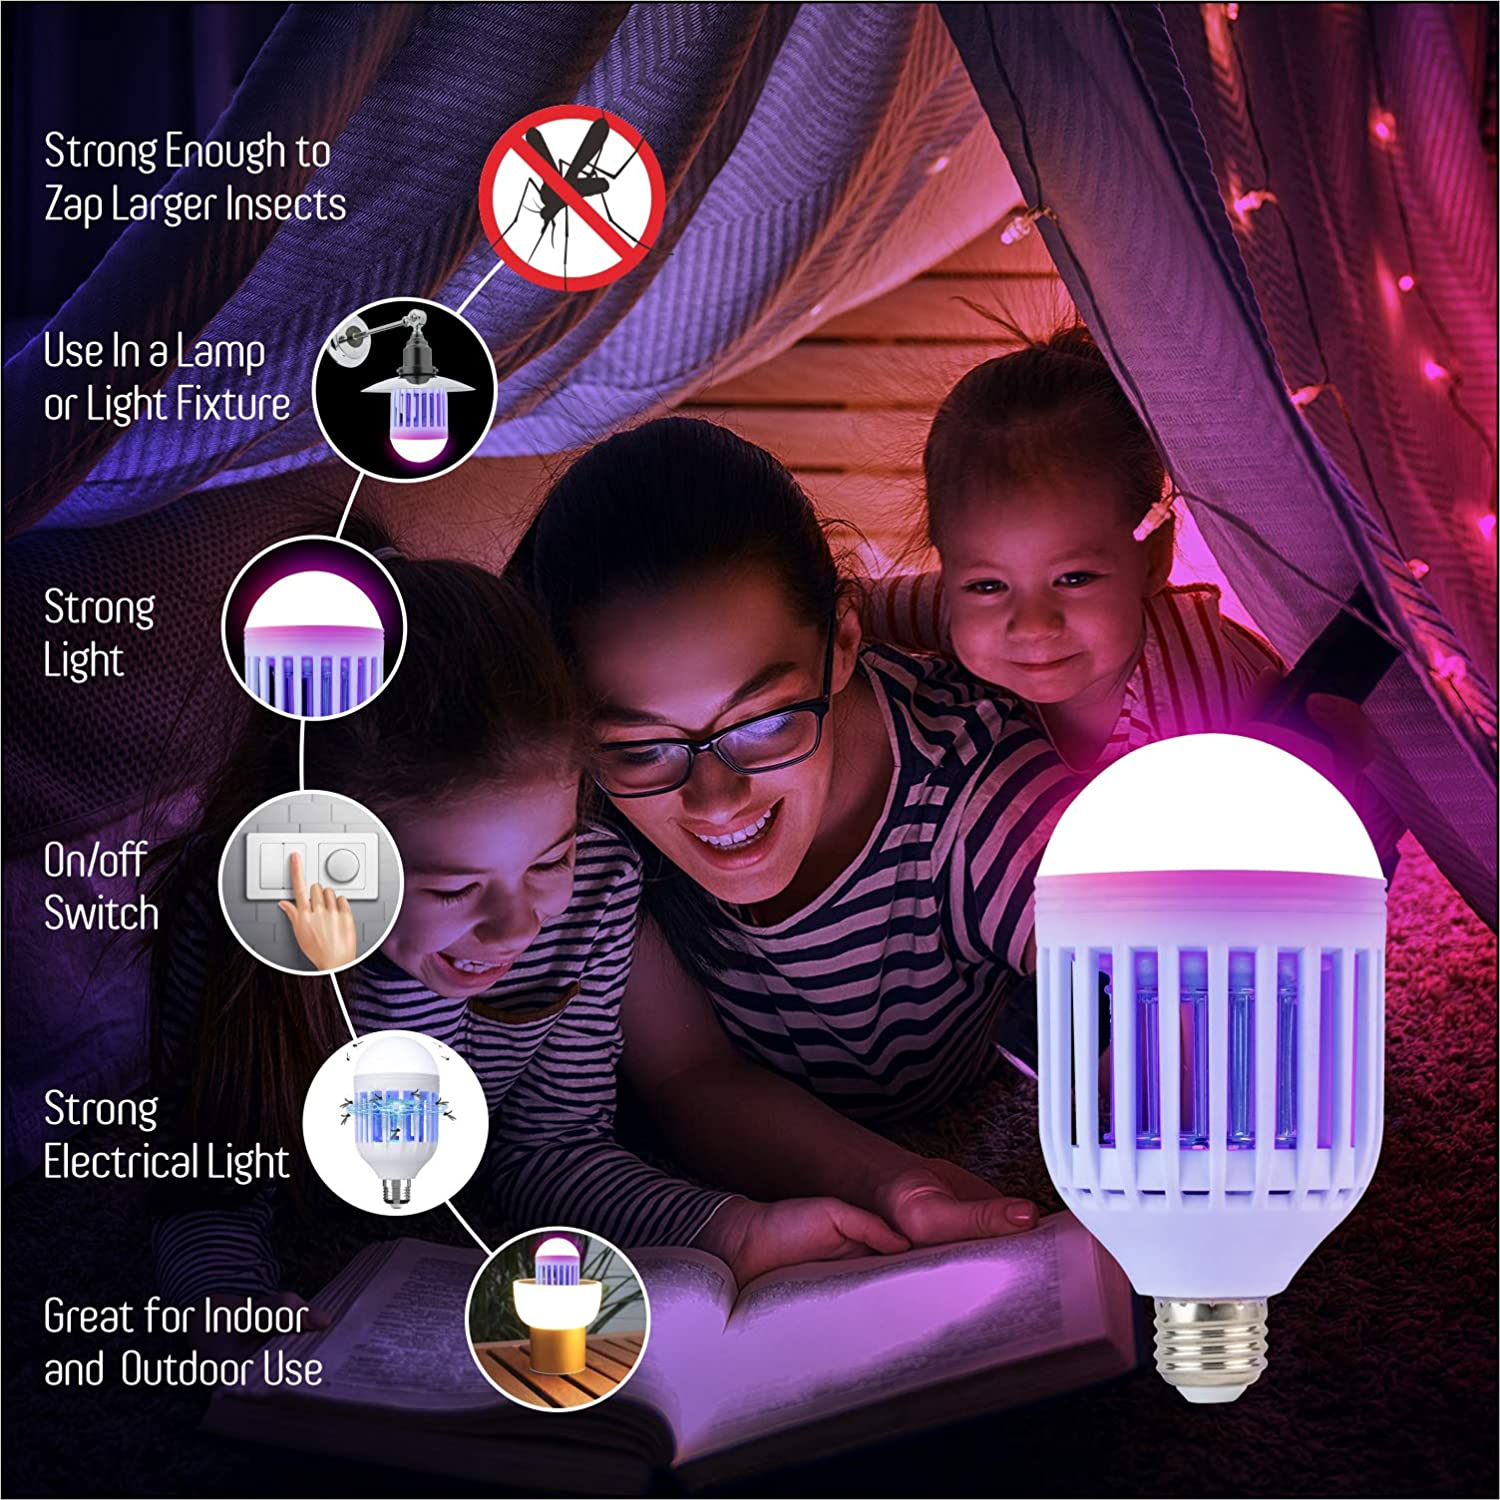 Bug Zapper Light Bulb 2 in 1 Mosquito Killer Lamp LED Electronic Insect & Fly Killer Indoor & Outdoor Insect Zapper insect traps, Fly Zapper Safe & Non-Toxic Silent & Effortless Operation pest control